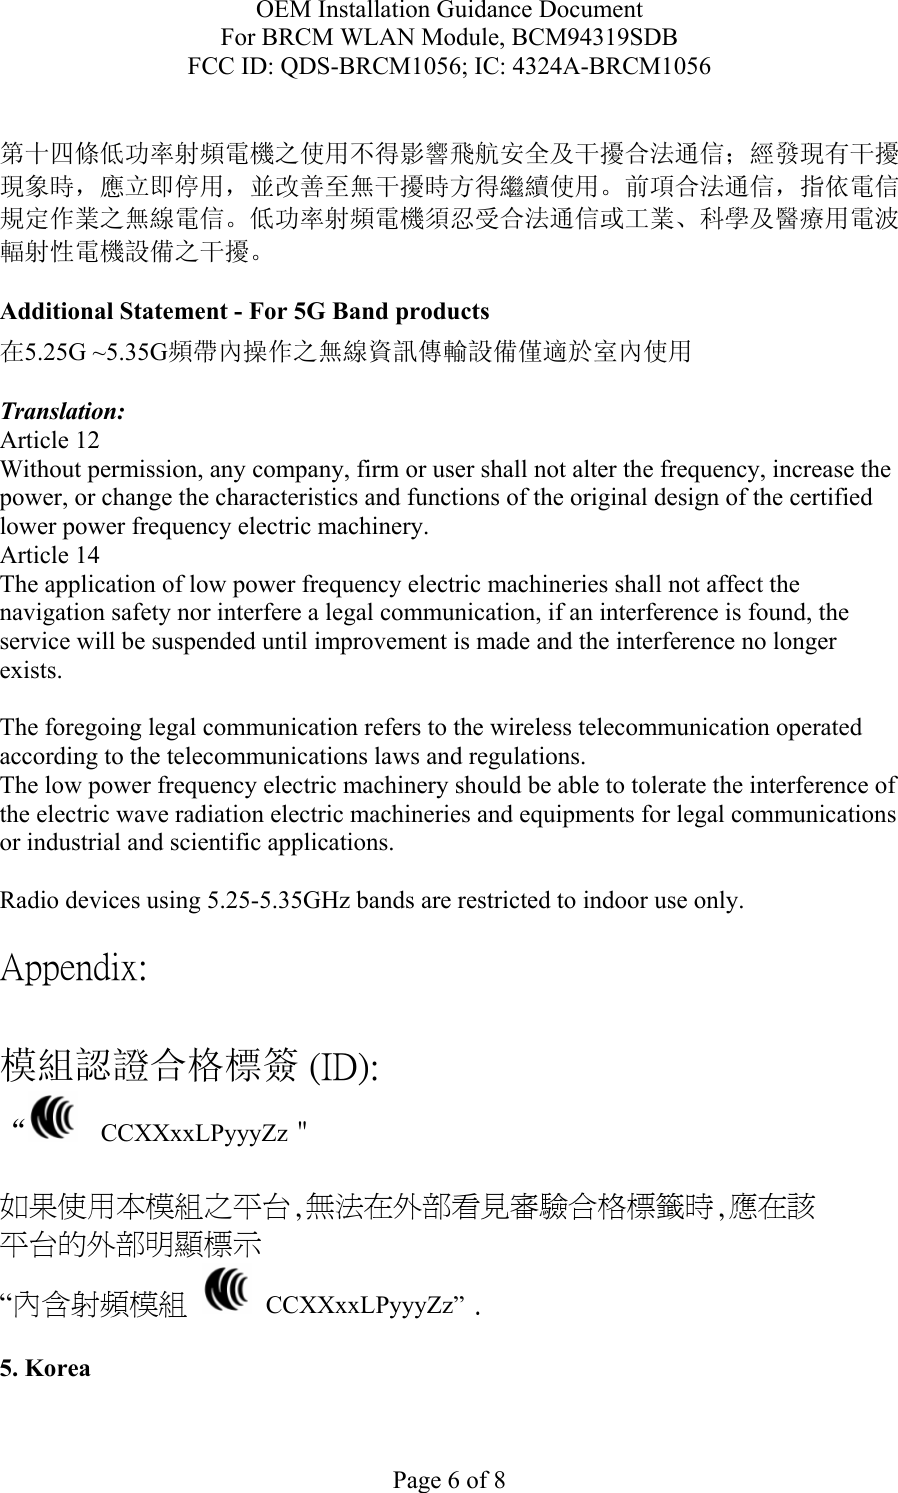 OEM Installation Guidance Document For BRCM WLAN Module, BCM94319SDB FCC ID: QDS-BRCM1056; IC: 4324A-BRCM1056  Page 6 of 8  第十四條低功率射頻電機之使用不得影響飛航安全及干擾合法通信；經發現有干擾現象時，應立即停用，並改善至無干擾時方得繼續使用。前項合法通信，指依電信規定作業之無線電信。低功率射頻電機須忍受合法通信或工業、科學及醫療用電波輻射性電機設備之干擾。  Additional Statement - For 5G Band products 在5.25G ~5.35G頻帶內操作之無線資訊傳輸設備僅適於室內使用  Translation: Article 12 Without permission, any company, firm or user shall not alter the frequency, increase the power, or change the characteristics and functions of the original design of the certified lower power frequency electric machinery. Article 14 The application of low power frequency electric machineries shall not affect the navigation safety nor interfere a legal communication, if an interference is found, the service will be suspended until improvement is made and the interference no longer exists.  The foregoing legal communication refers to the wireless telecommunication operated according to the telecommunications laws and regulations. The low power frequency electric machinery should be able to tolerate the interference of the electric wave radiation electric machineries and equipments for legal communications or industrial and scientific applications.  Radio devices using 5.25-5.35GHz bands are restricted to indoor use only.  Appendix:  模組認證合格標簽 (ID): “   CCXXxxLPyyyZz＂  如果使用本模組之平台,無法在外部看見審驗合格標籤時,應在該 平台的外部明顯標示 “內含射頻模組   CCXXxxLPyyyZz” .  5. Korea  